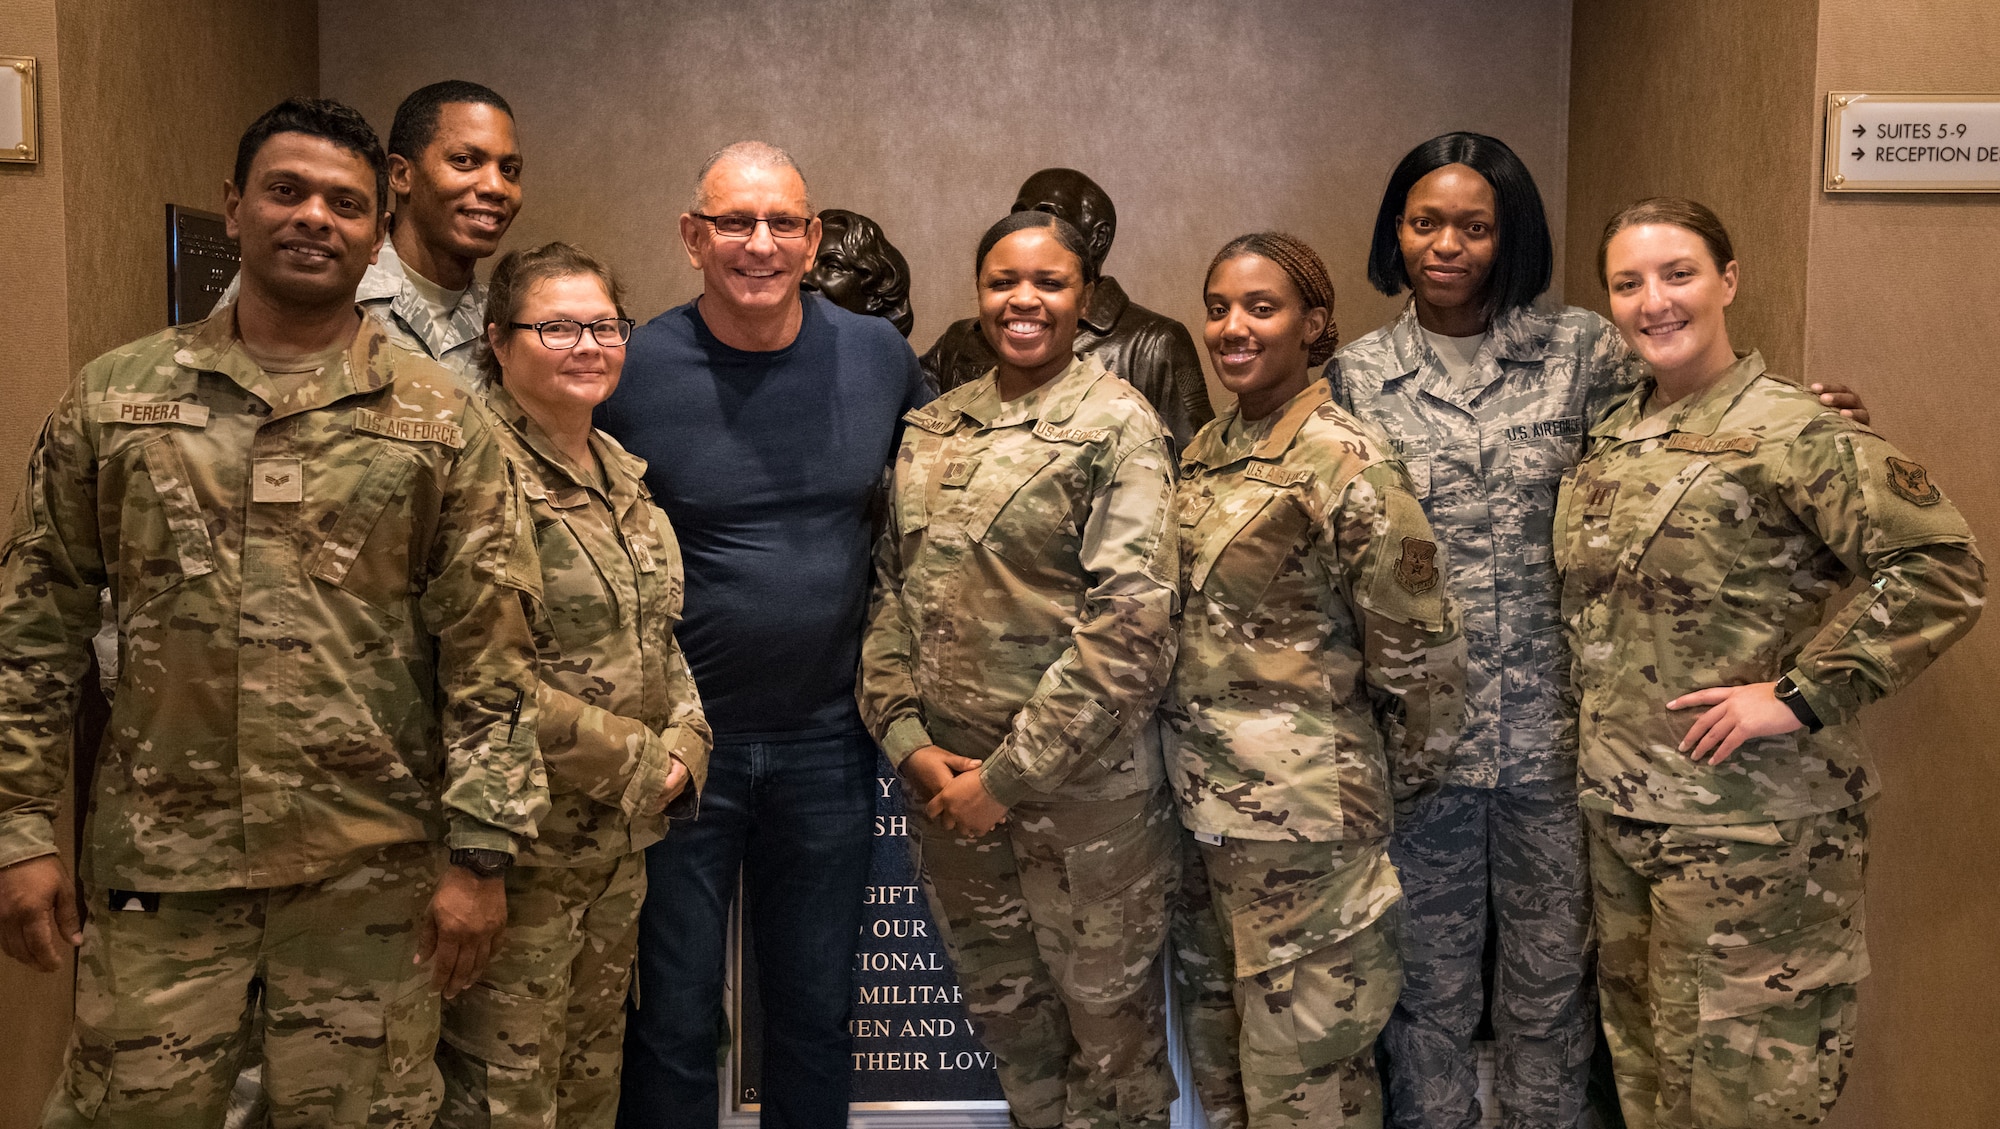 Chef Robert Irvine and Air Force Mortuary Affairs Operations personnel pose for a photo, Aug. 27, 2019, at the Fisher House on Dover Air Force Base, Del. Irvine toured the Fisher House and was briefed on its history. (U.S. Air Force photo by Roland Balik)